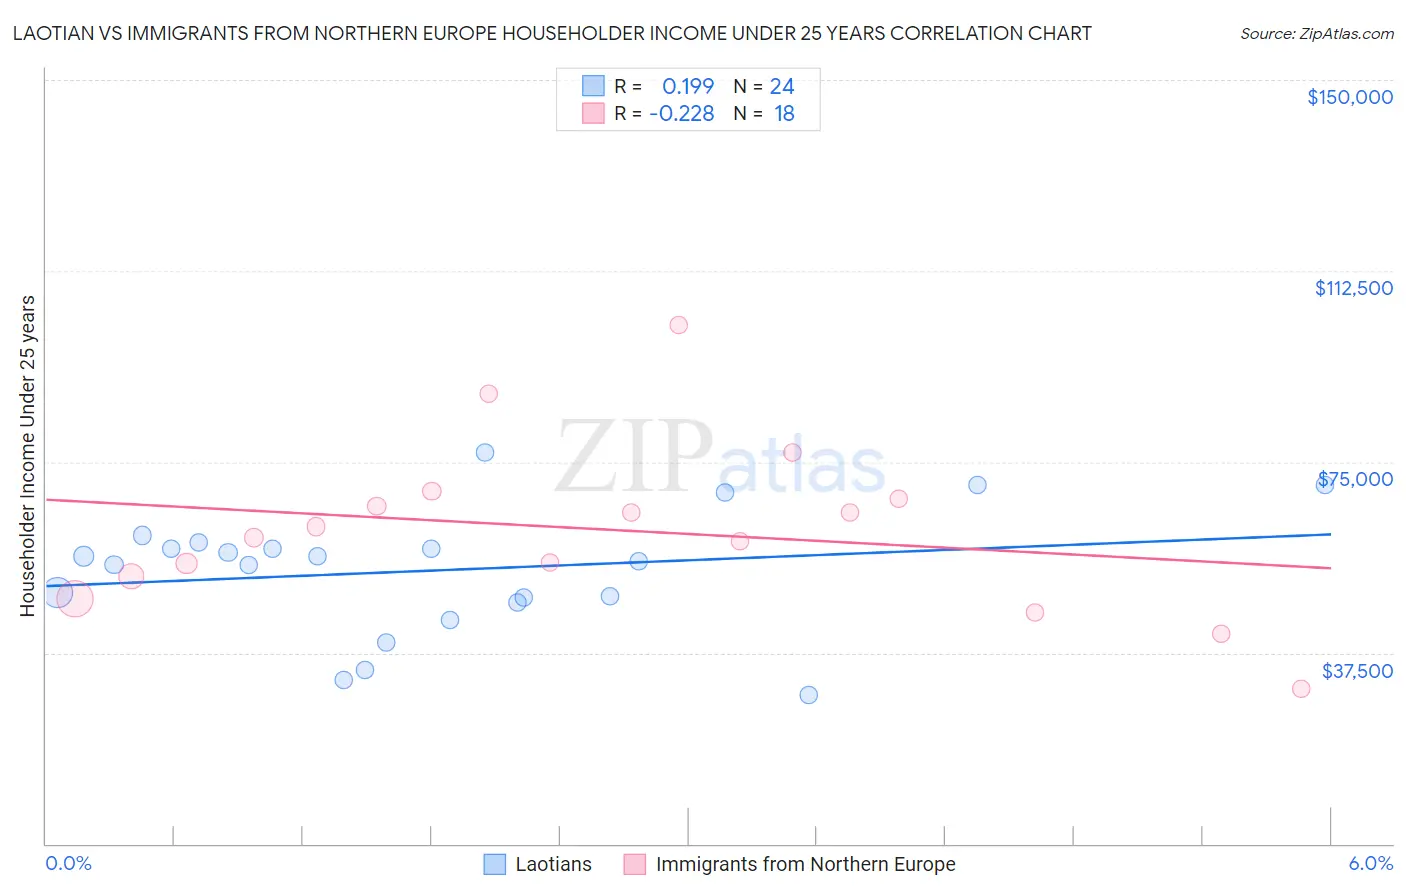 Laotian vs Immigrants from Northern Europe Householder Income Under 25 years